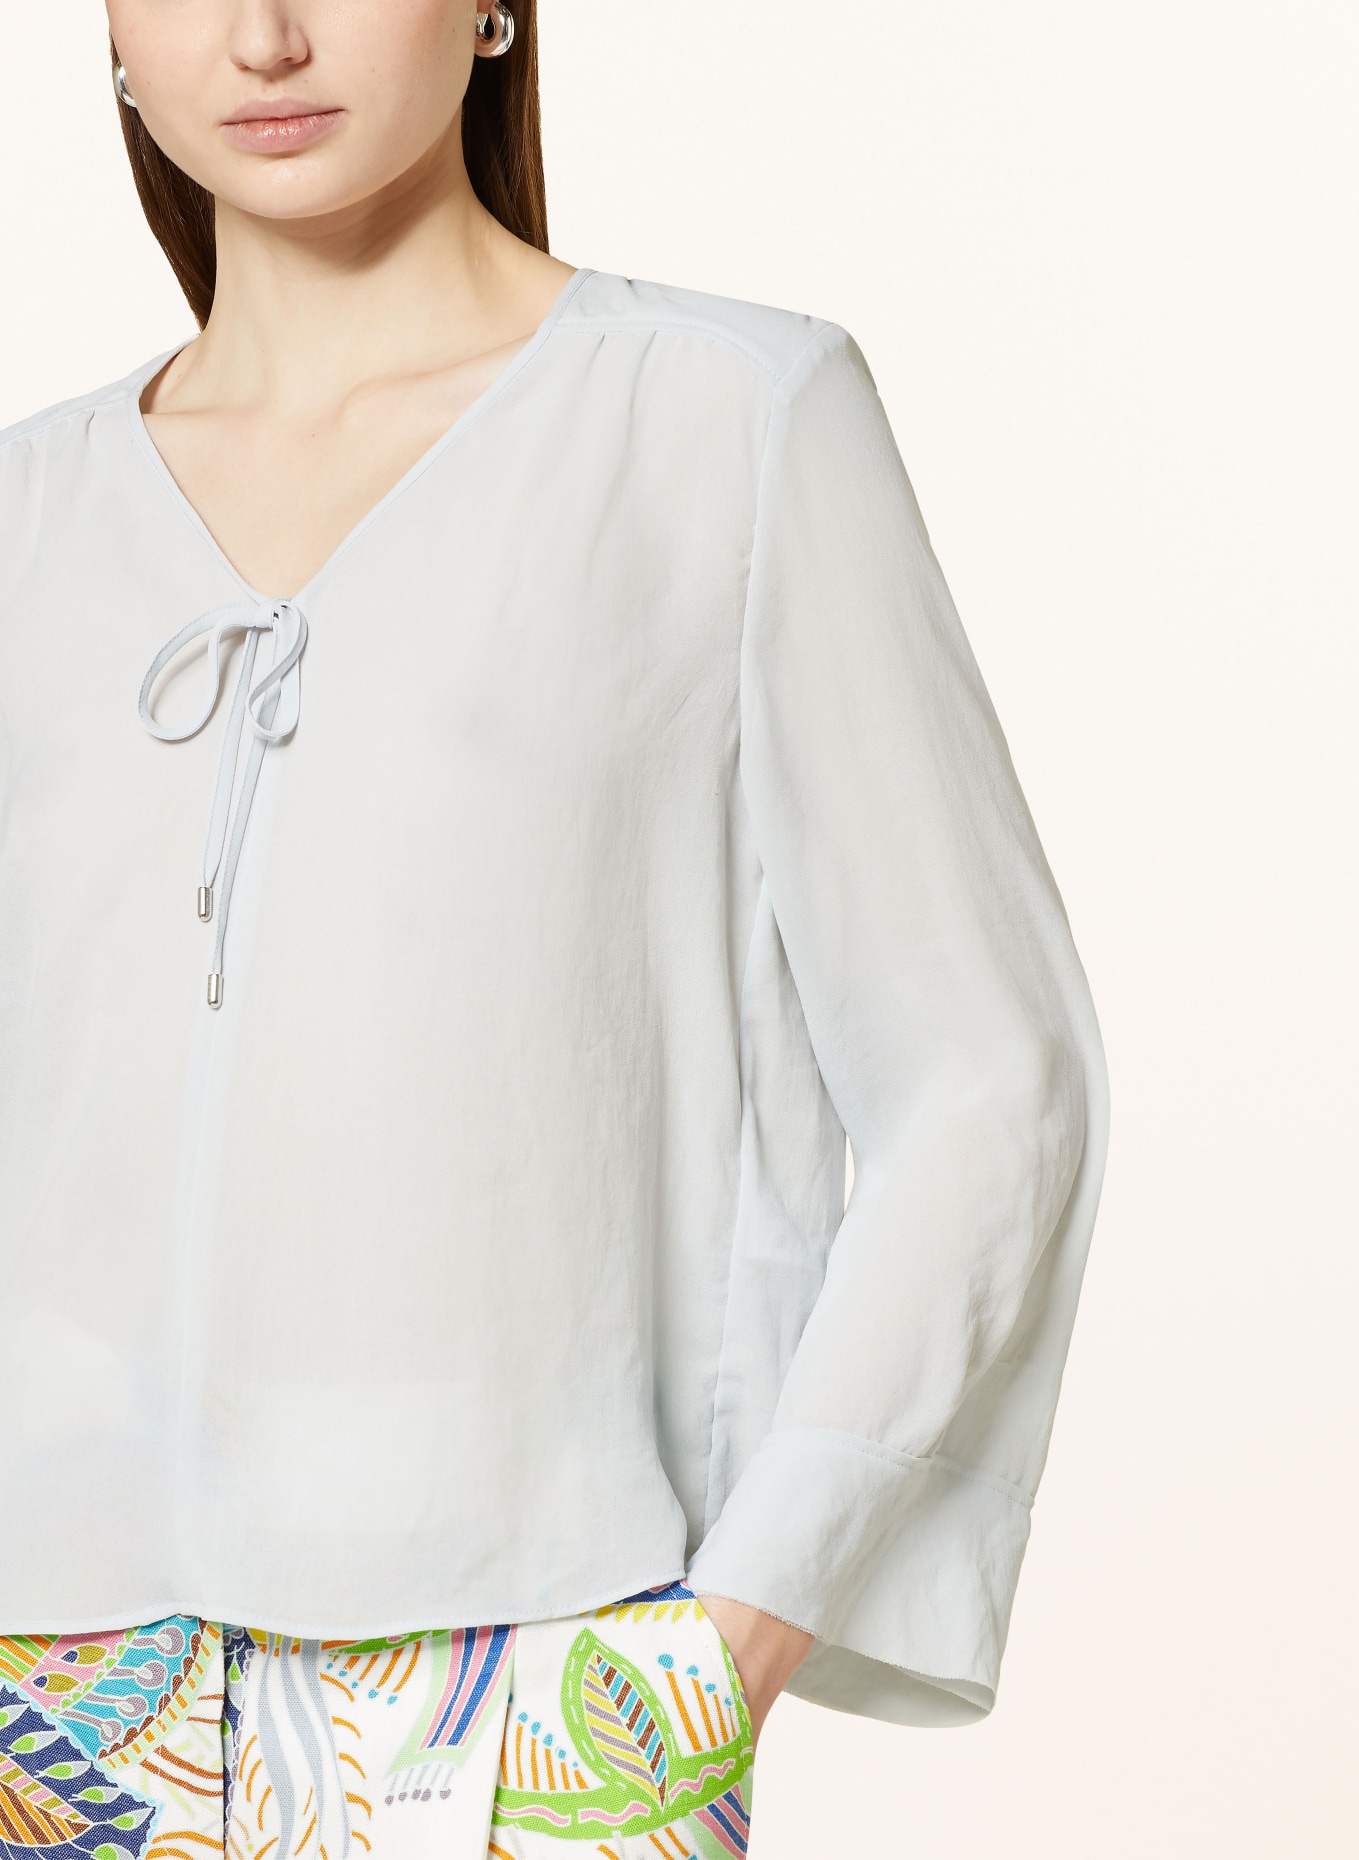 MARC CAIN Shirt blouse, Color: 302 smoky ice new (Image 4)